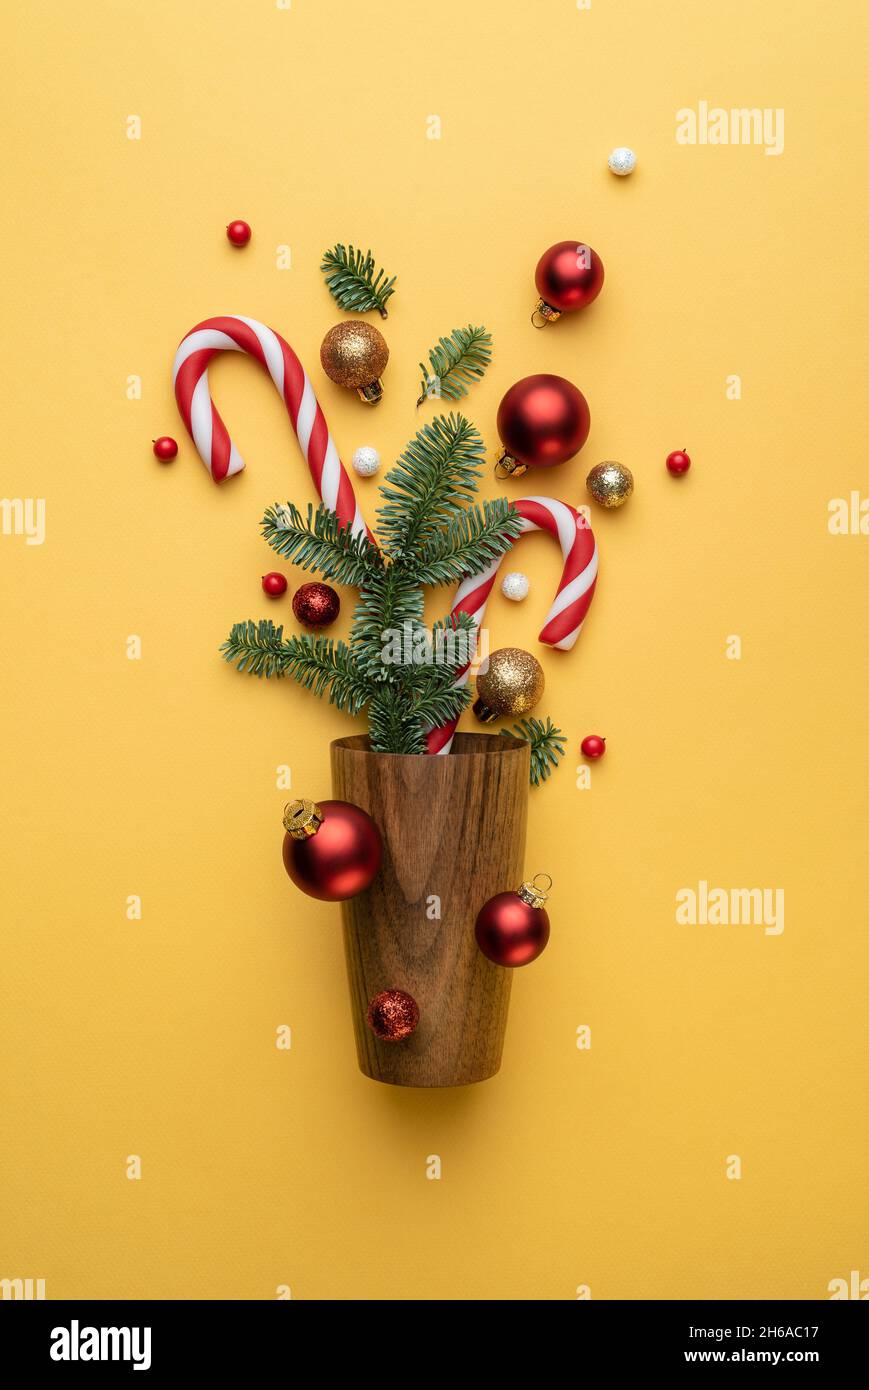 Christmas card with Christmas tree ornaments on yellow background Stock Photo